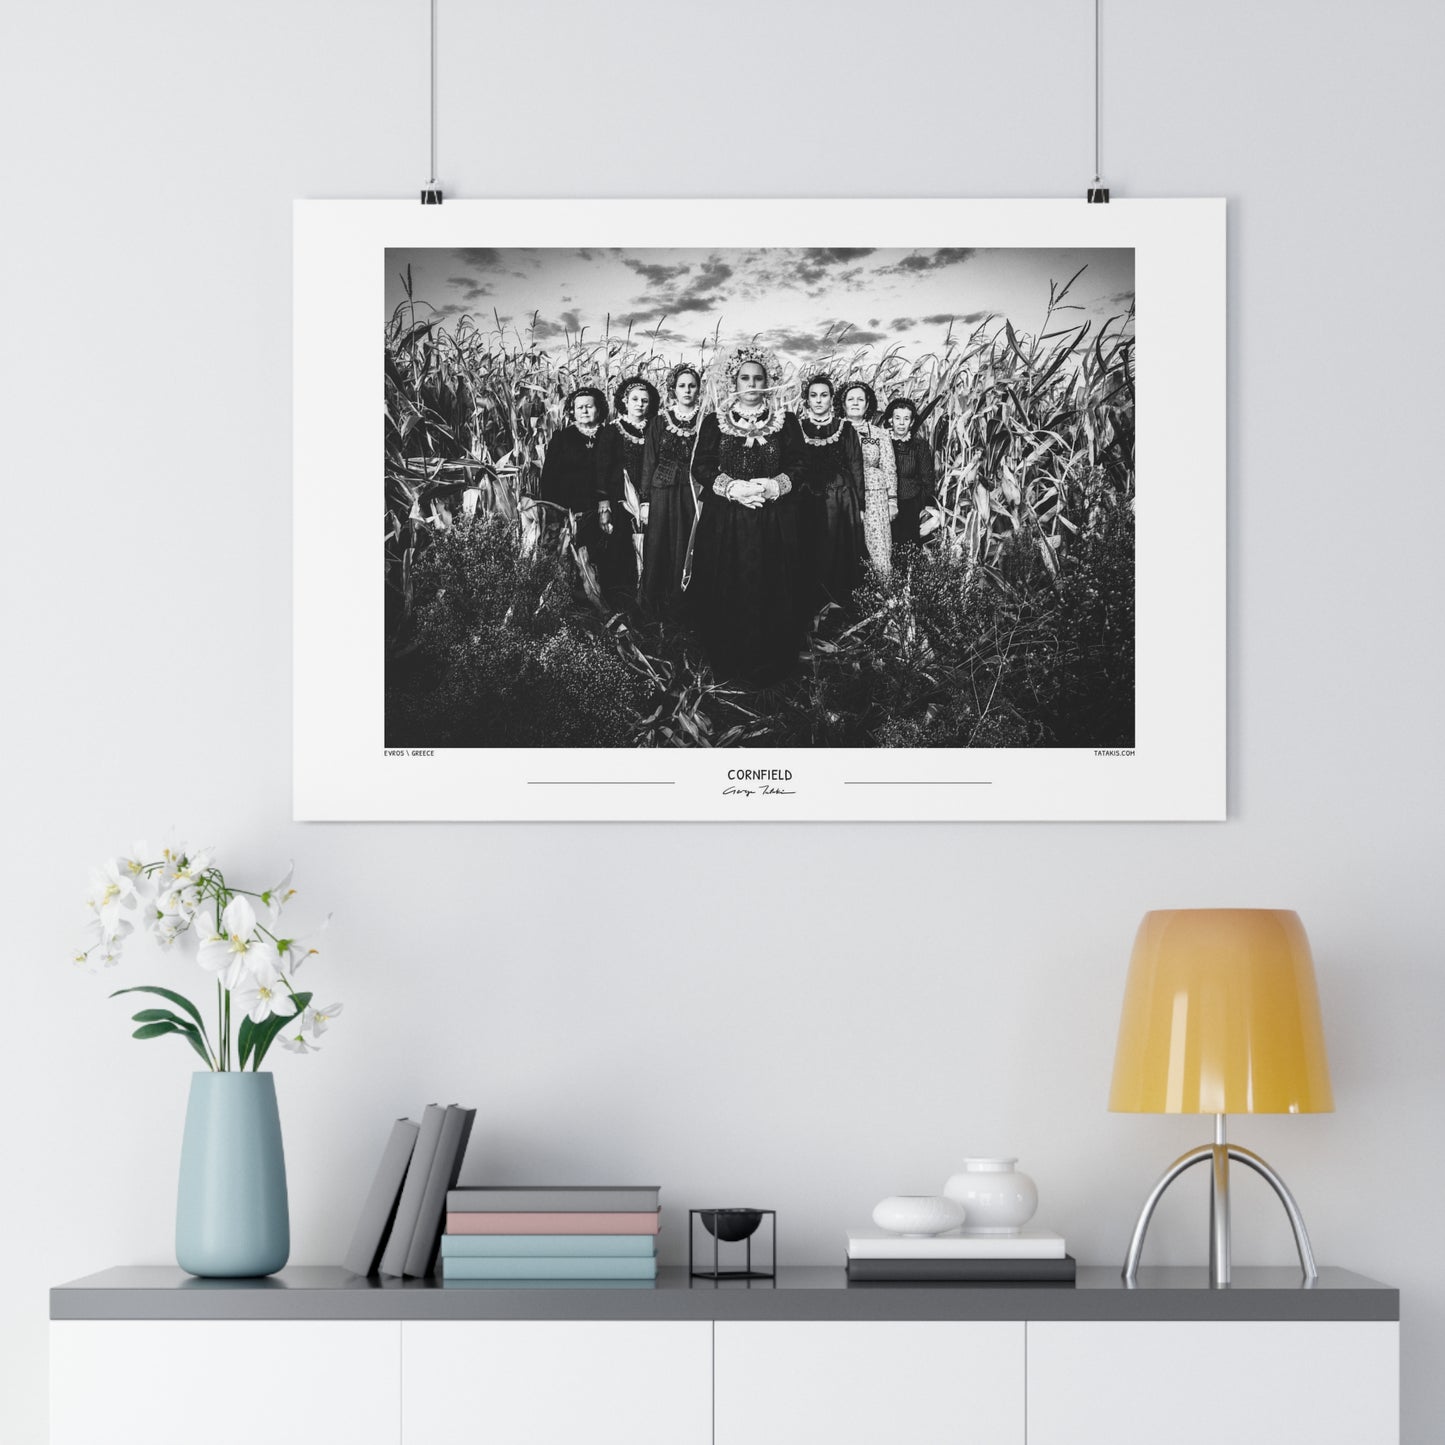 Black and White Photo Wall Art Poster from Greece | Costumes in a Cornfield, Nea Vyssa, Evros, Thrace, by George Tatakis - large size